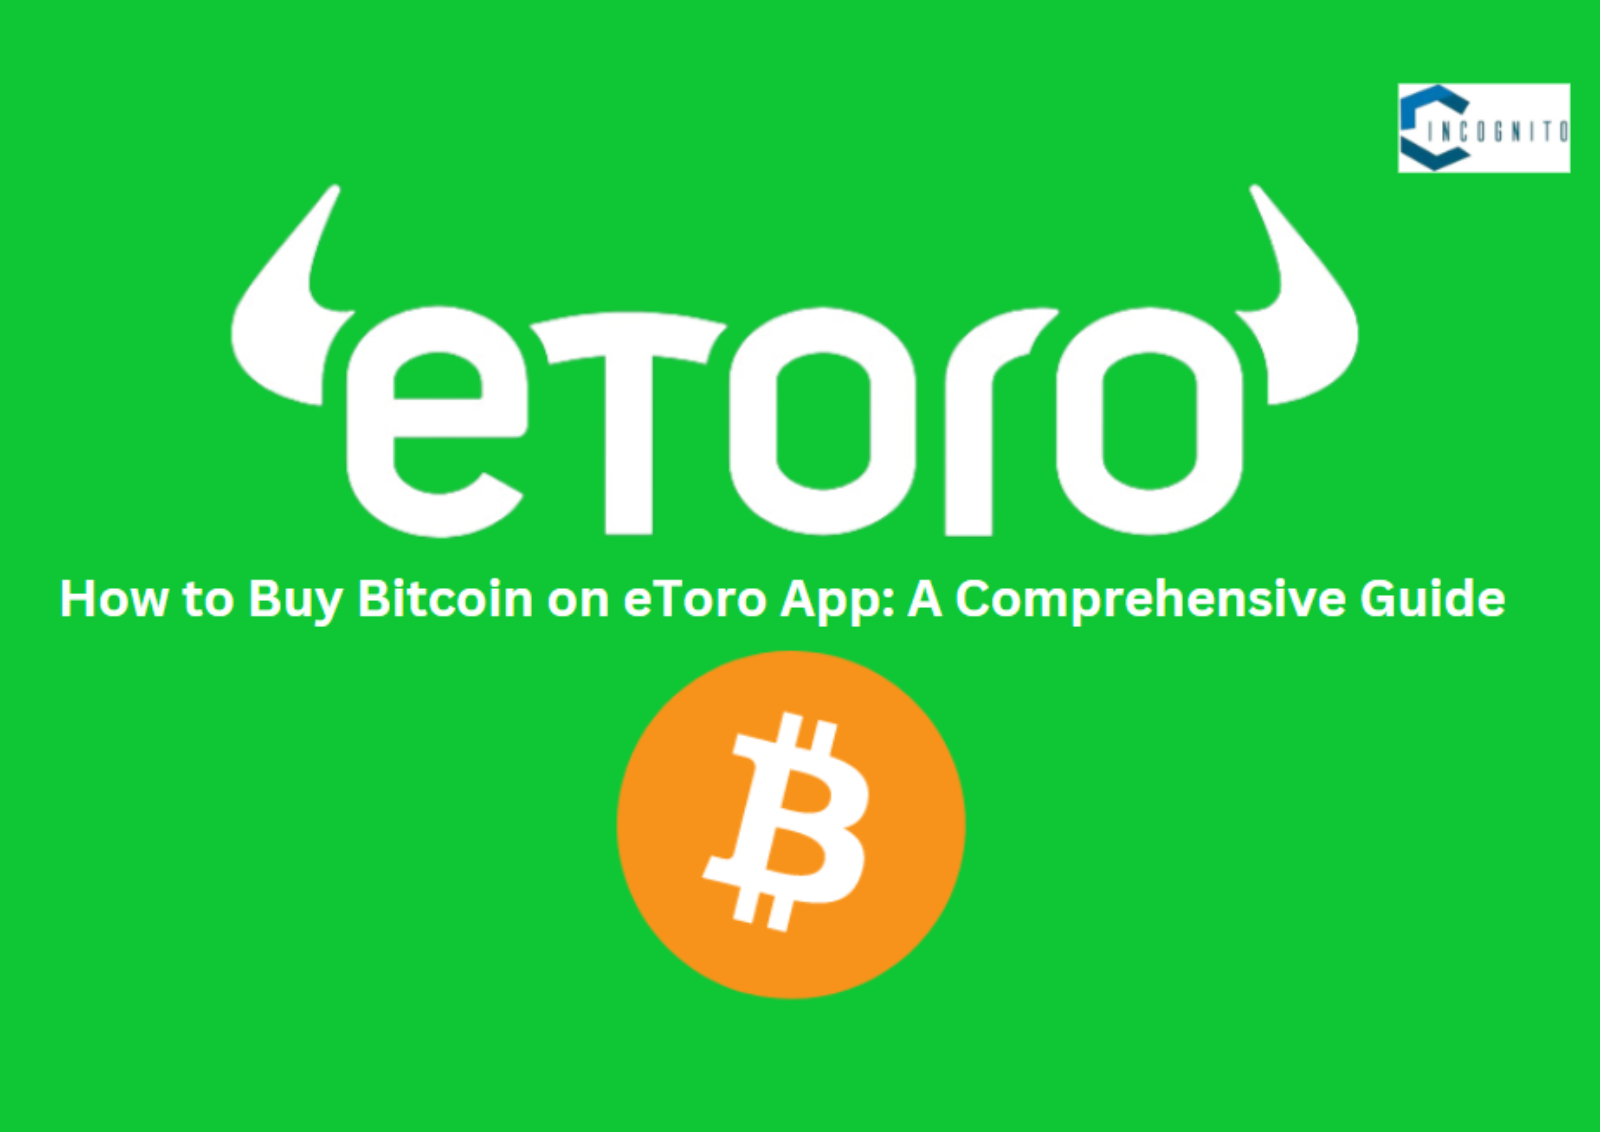 How to Buy Bitcoin on eToro App: A Comprehensive Guide